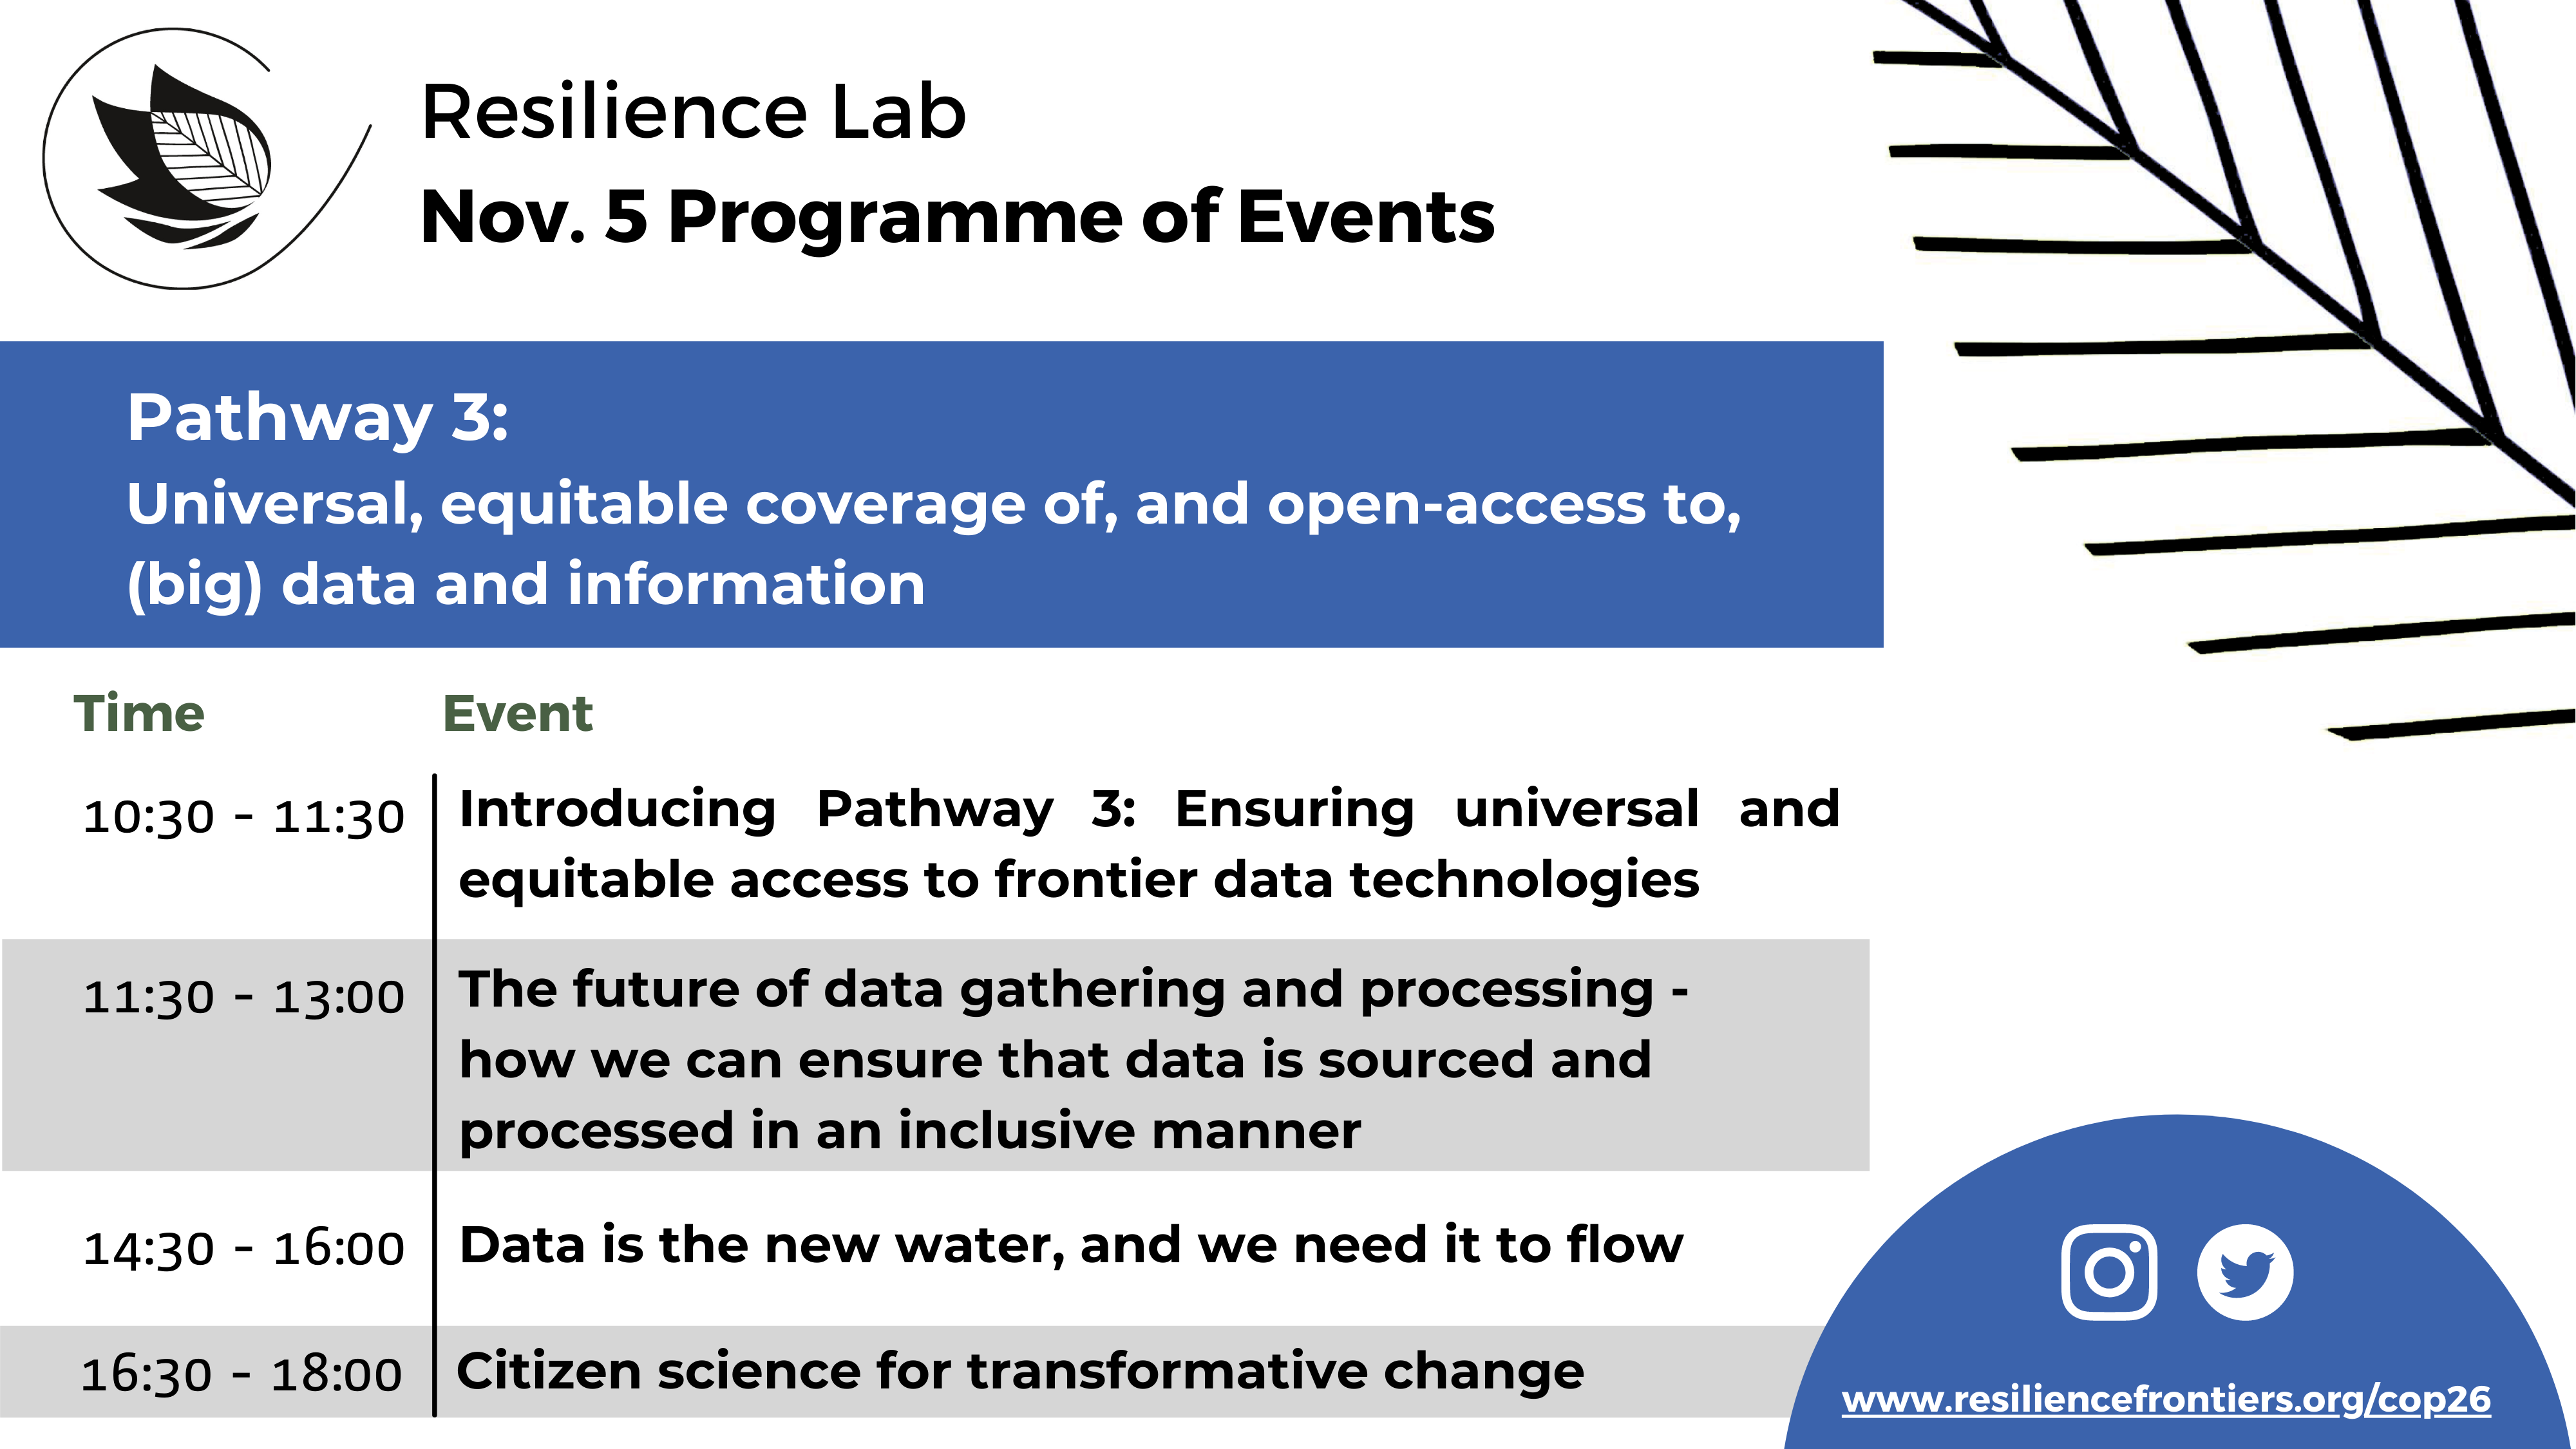 Resilience Lab Day 4 Programme of Events